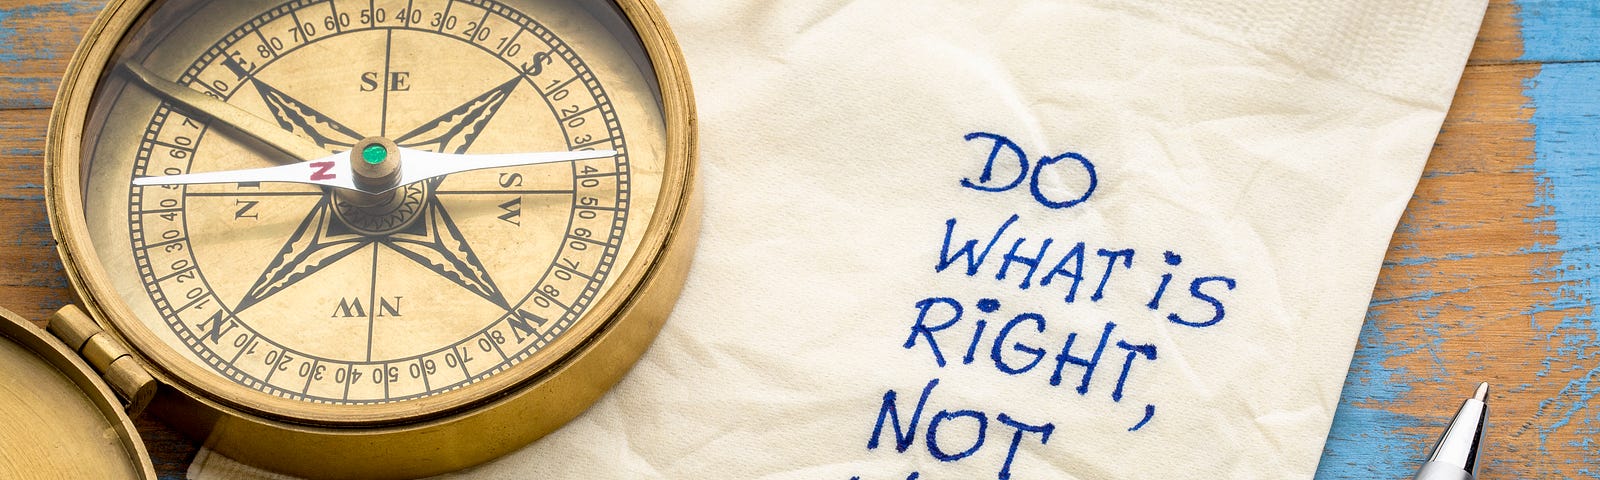 Desktop with a compass, napkin and pen. Written on the napkin are the words “DO WHAT IS RIGHT, NOT WHAT IT IS EASY.”